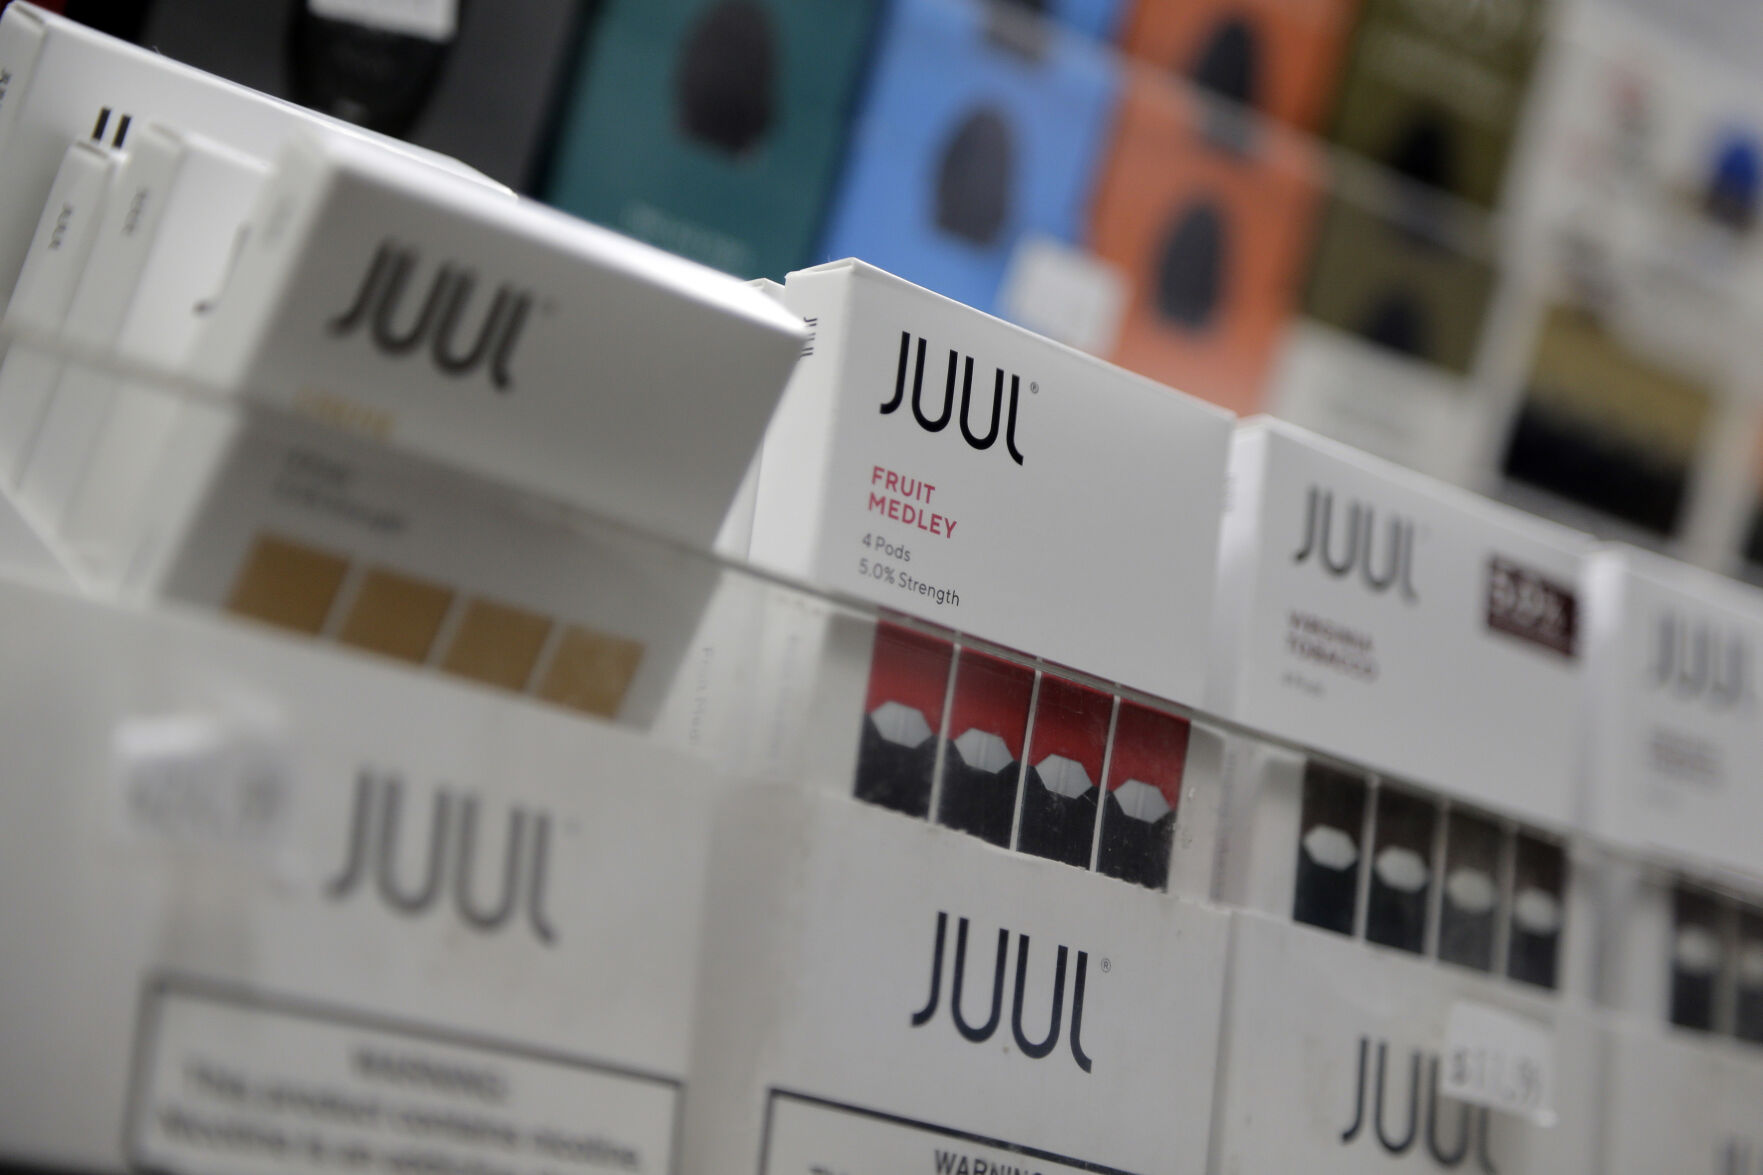 <p>FILE - Juul products are displayed at a smoke shop in New York, on Dec. 20, 2018. Embattled vaping company Juul Labs announced layoffs Thursday, Nov. 10, 2022, as the company tries to weather growing setbacks to its electronic cigarette business, including lawsuits, government bans and increasing competition. (AP Photo/Seth Wenig, File)</p>   PHOTO CREDIT: Seth Wenig - staff, AP